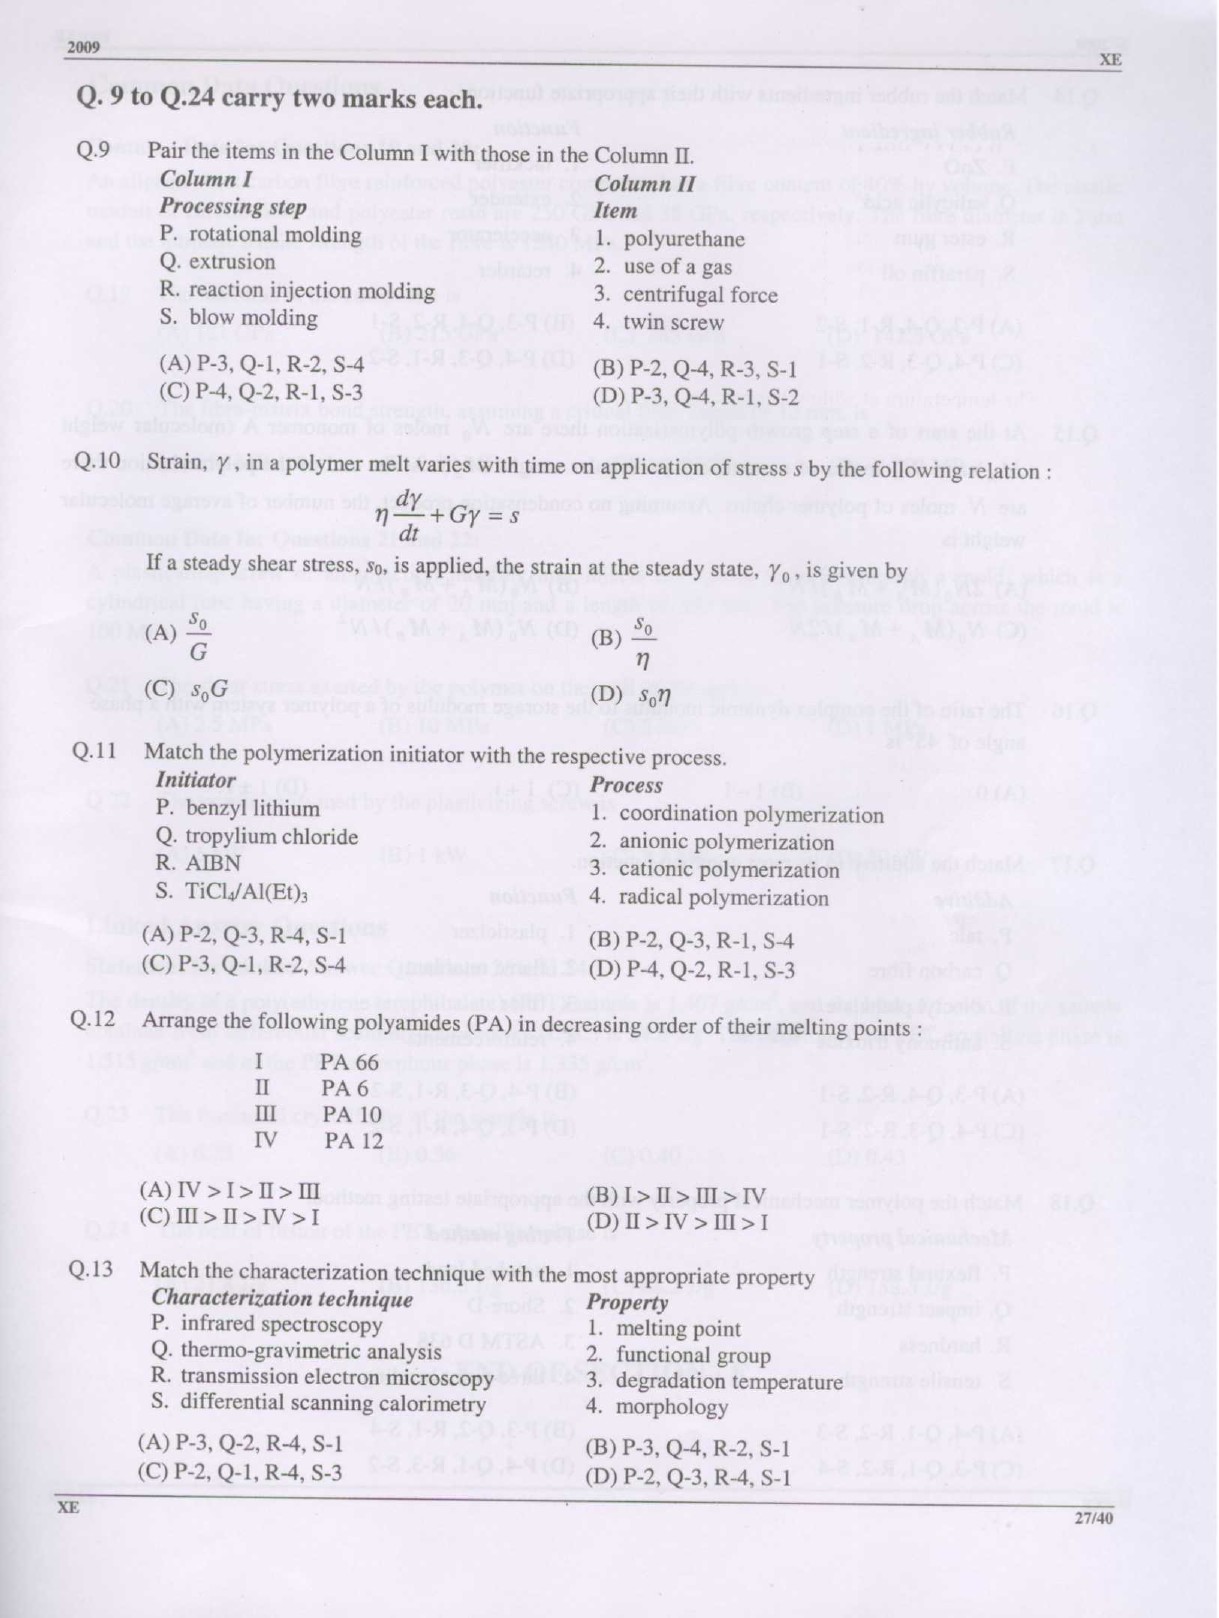 GATE Exam Question Paper 2009 Engineering Sciences 27